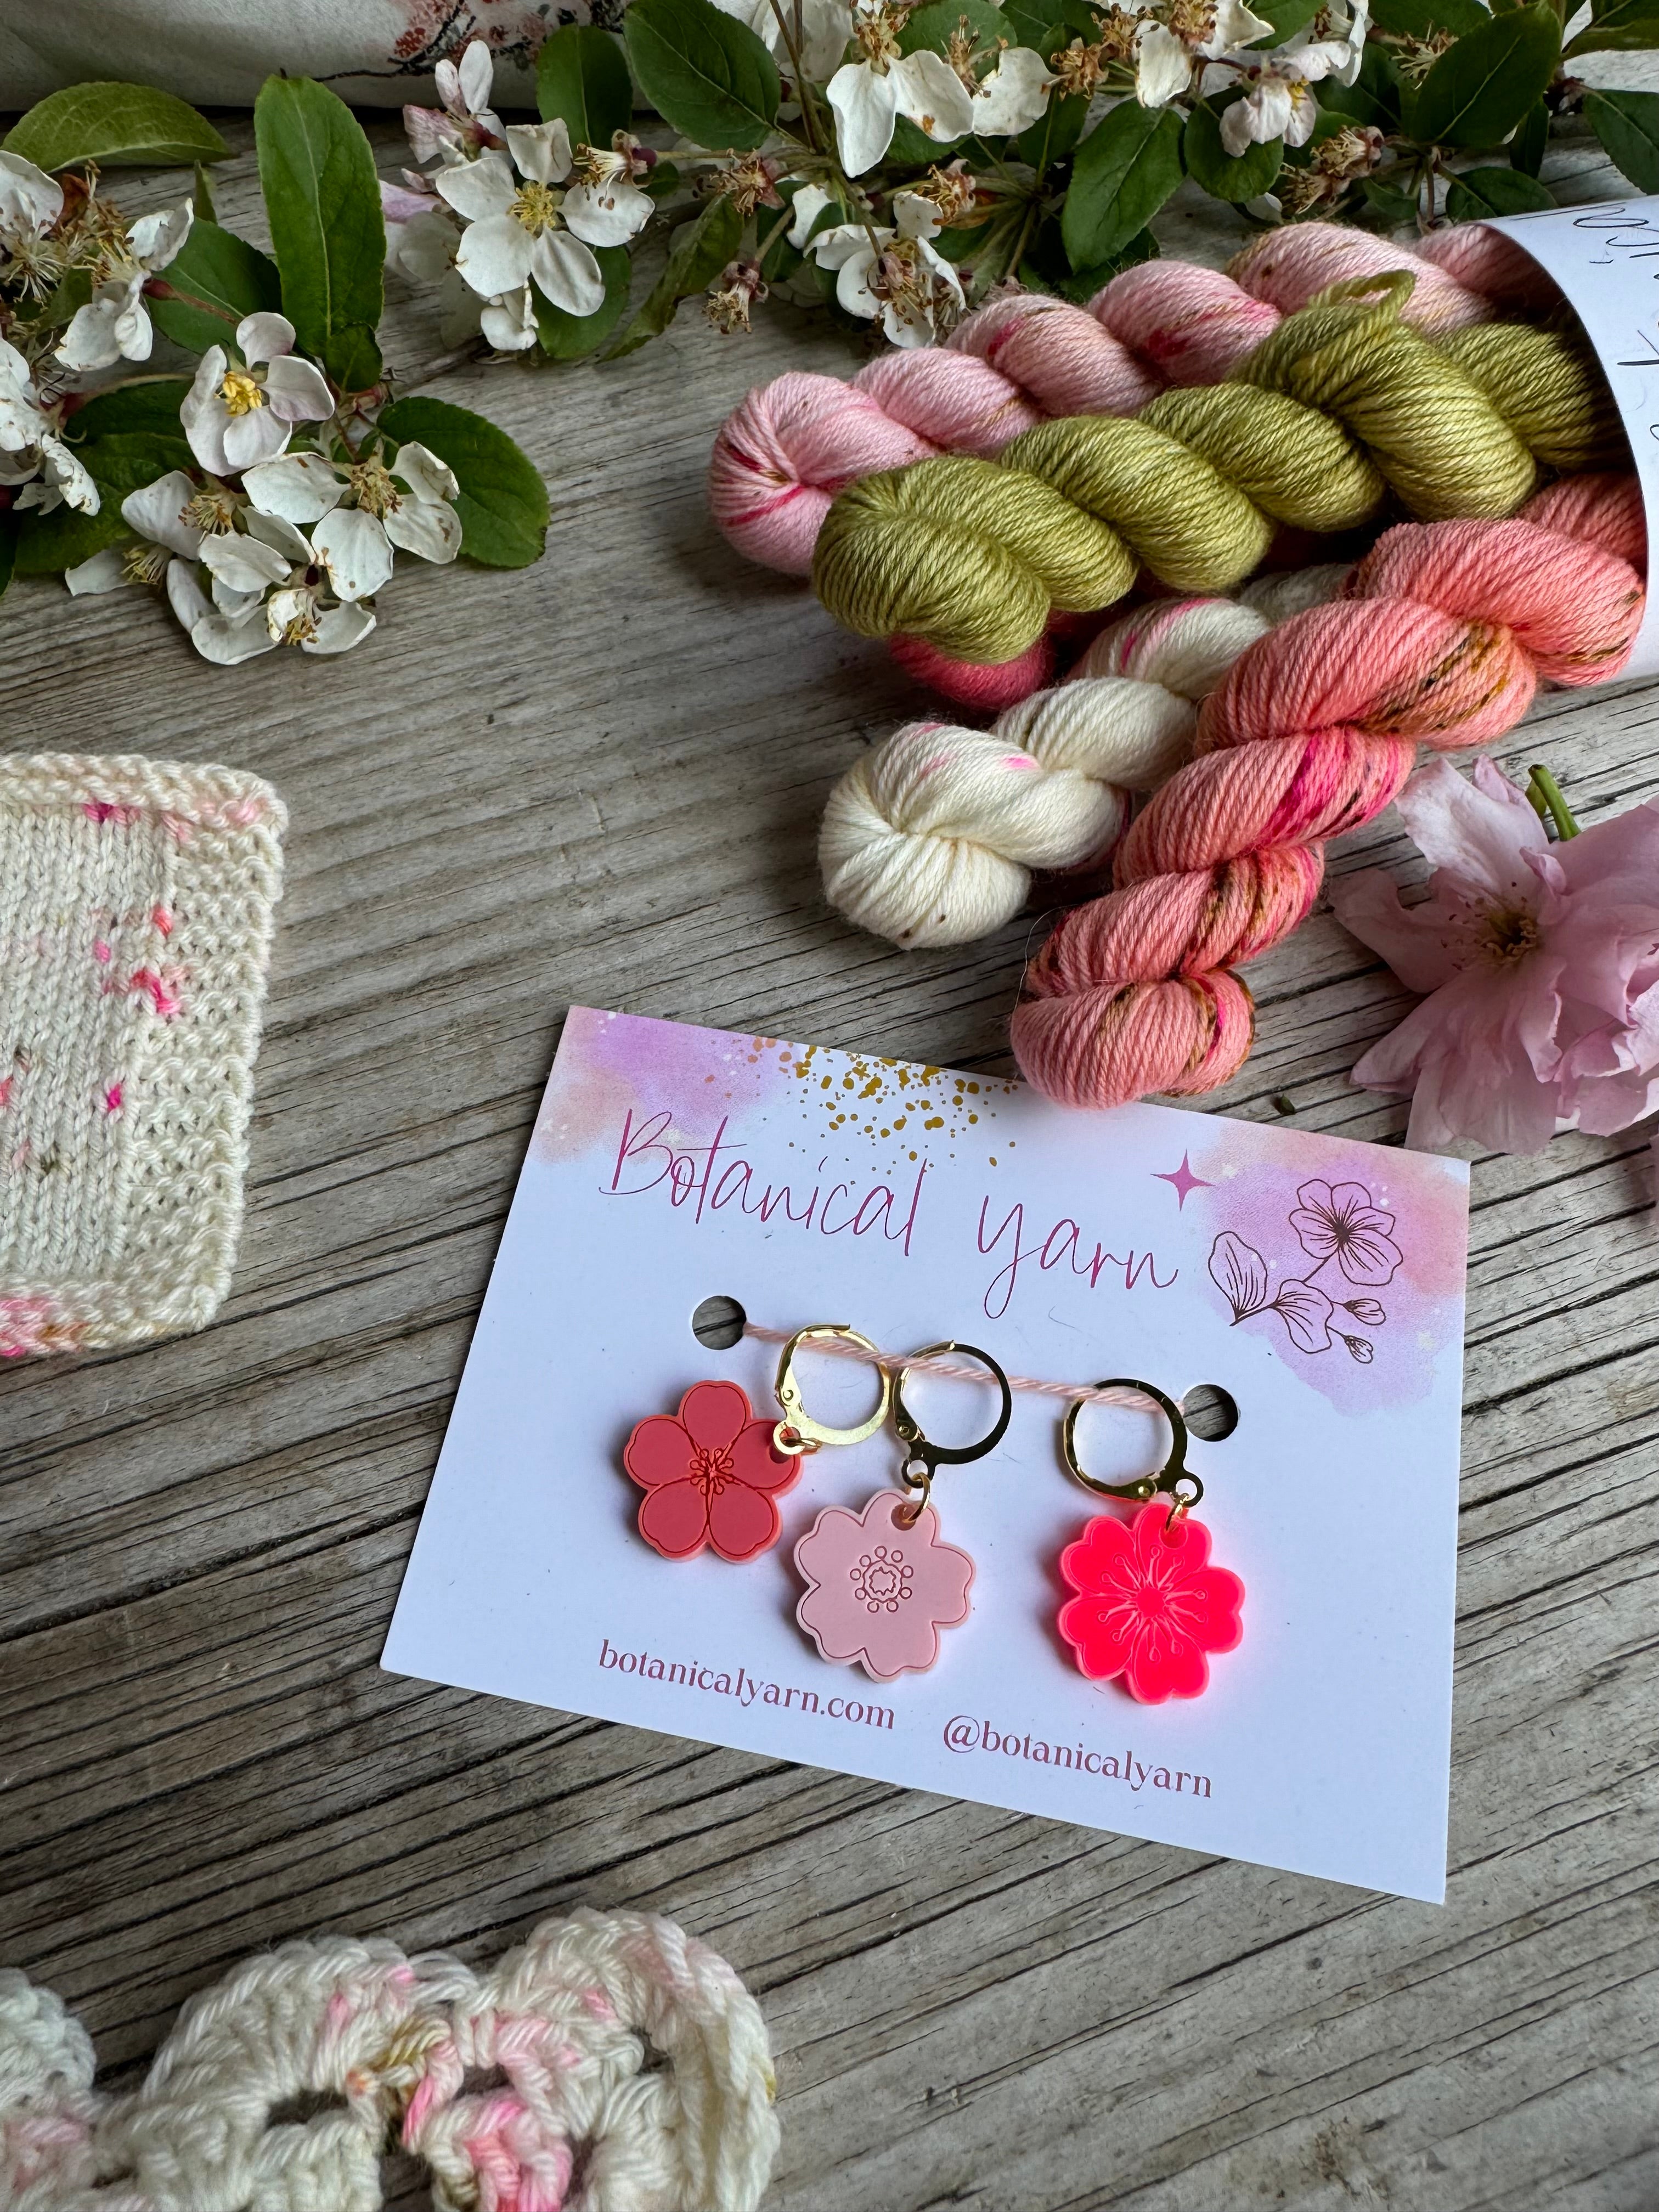 Sakura Stitch markers / progress keepers made in collaboration with Unwrapped Yarn